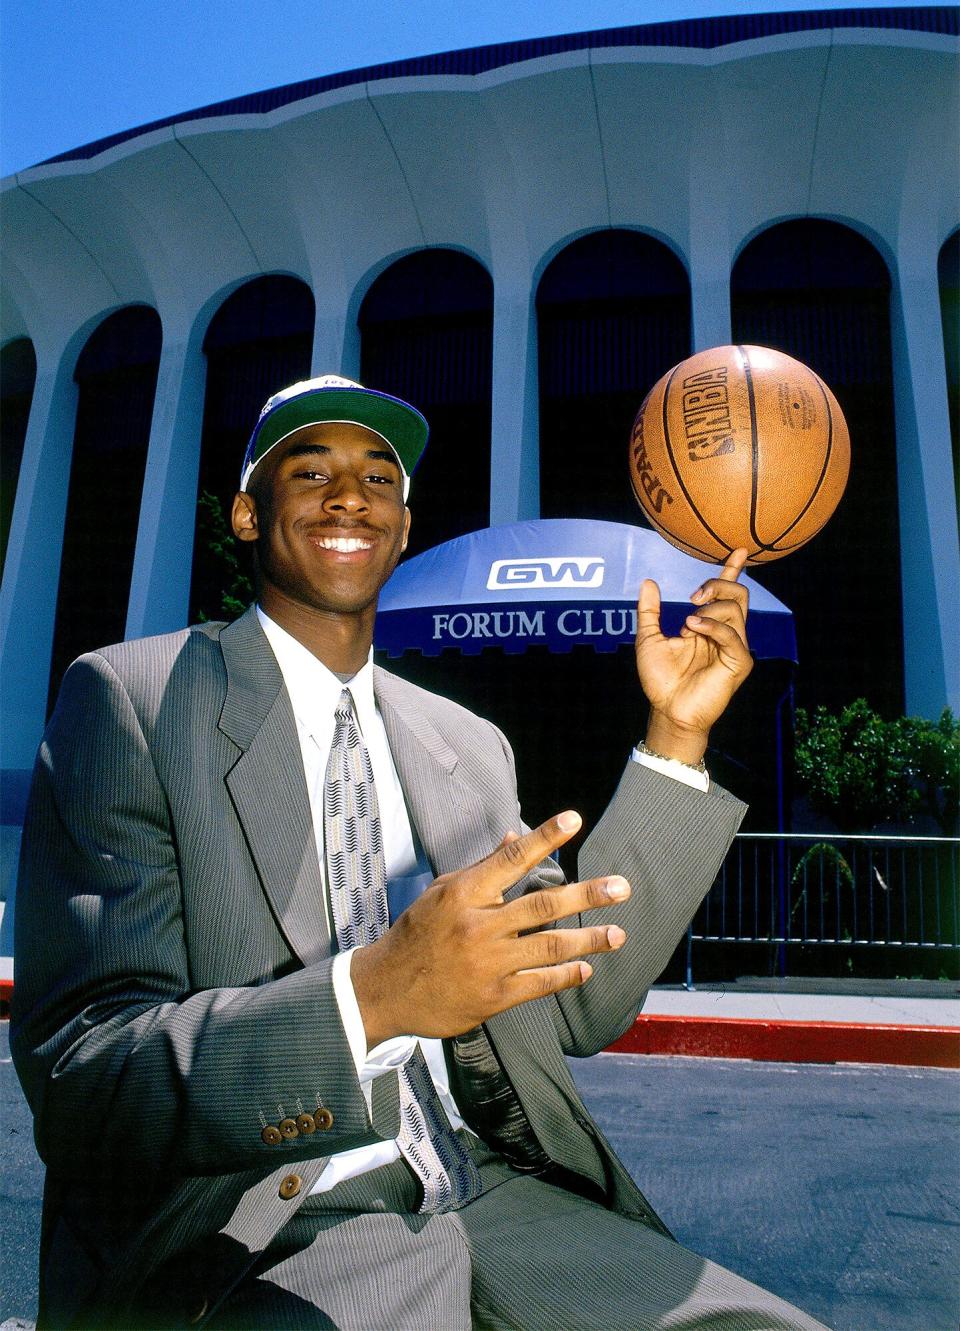 After earning his No. 8 Lakers number, Bryant is seen grinning while posing with a basketball outside the Forum in Inglewood, California, in 1997.